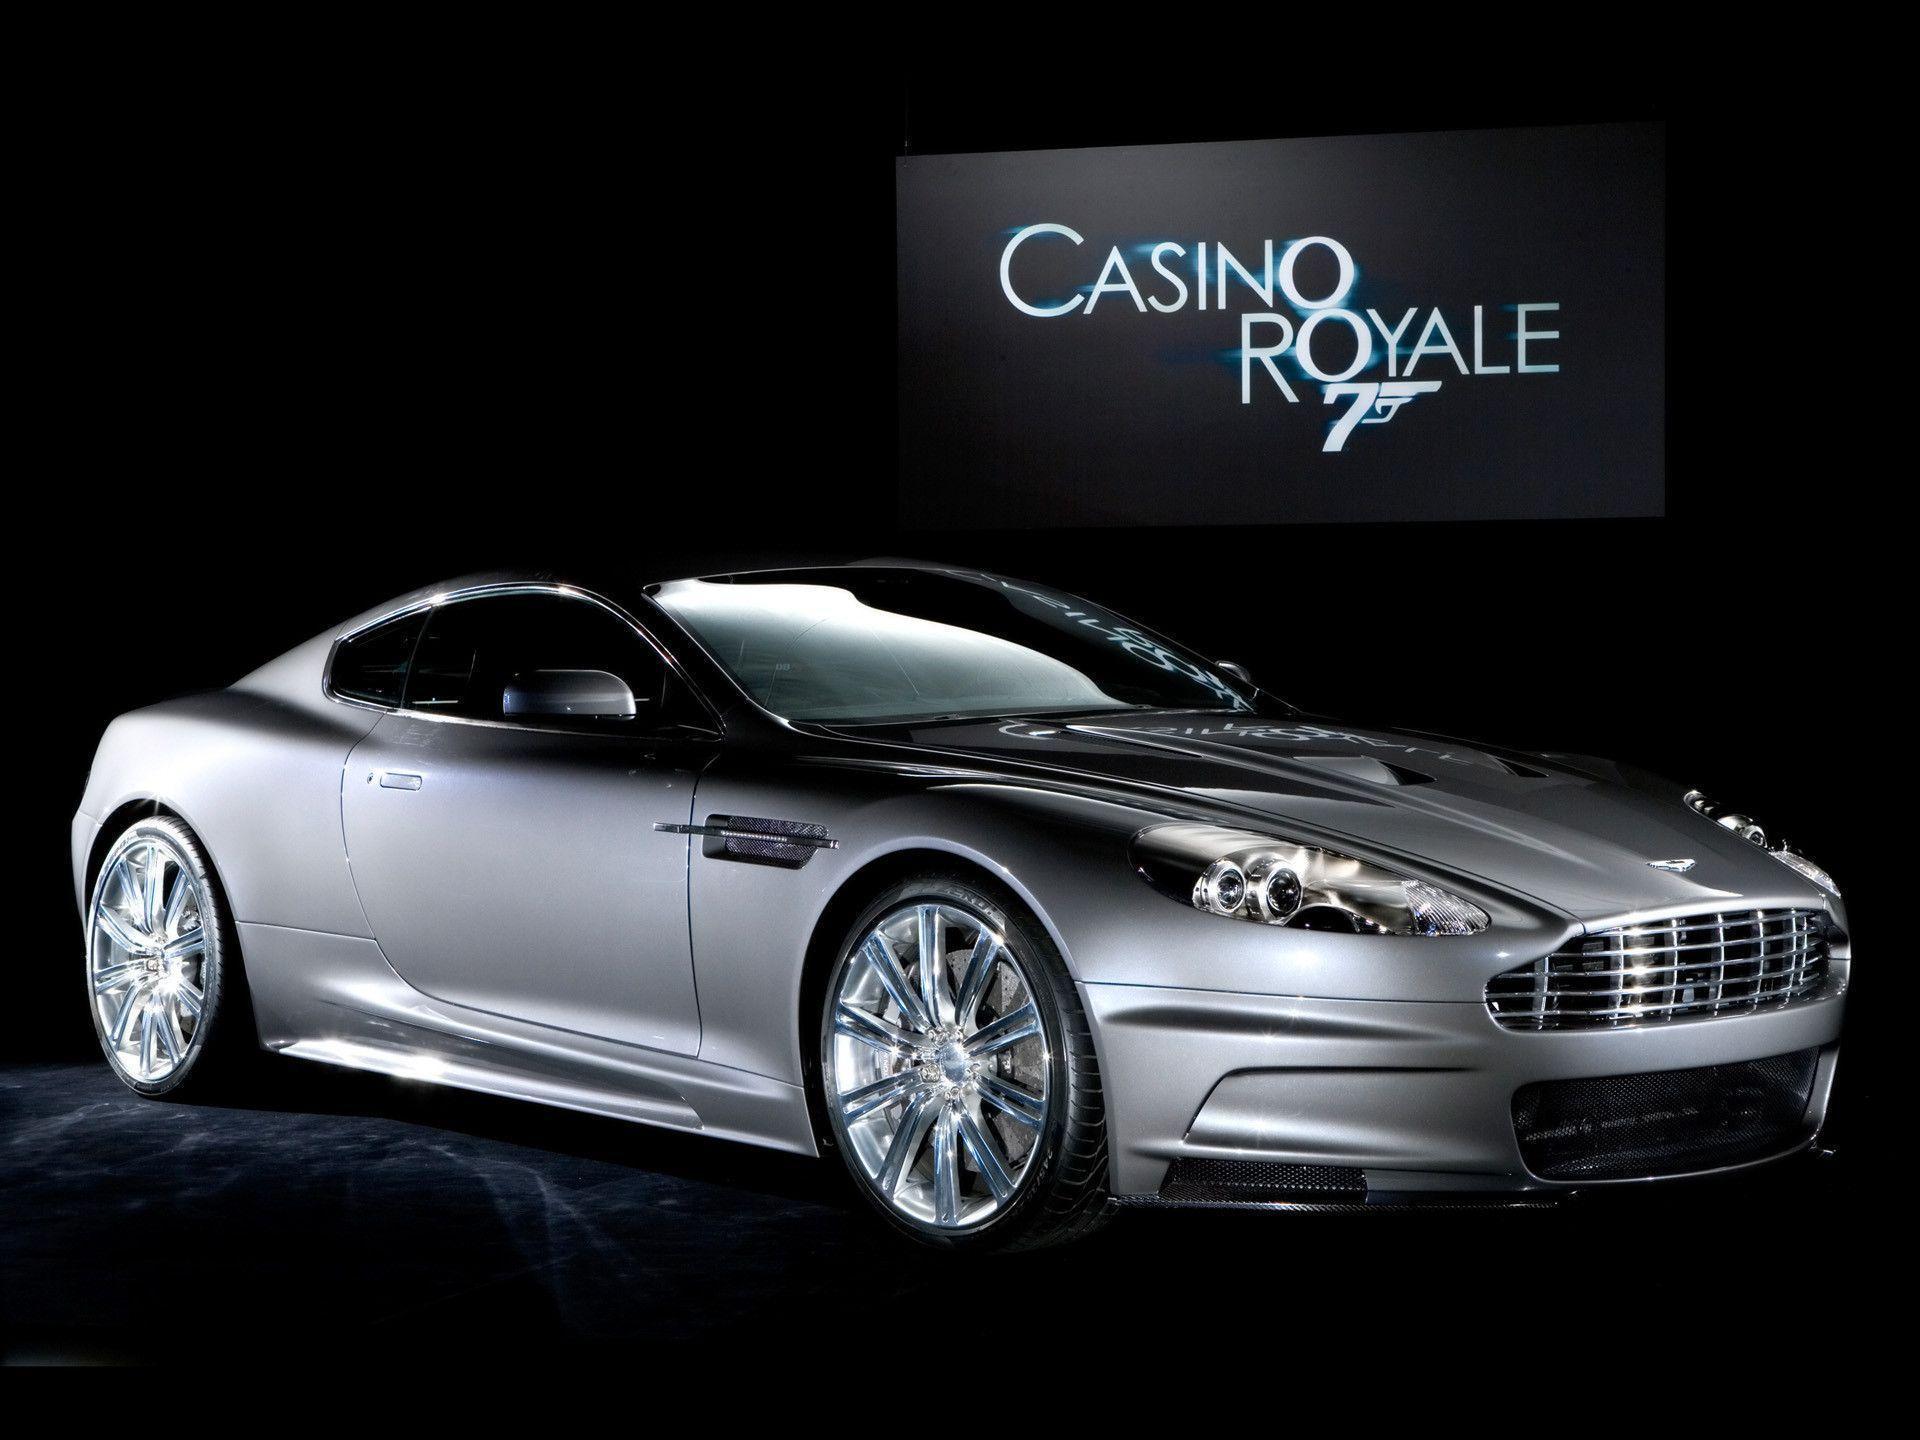 Wallpapers of the day: Casino Royale